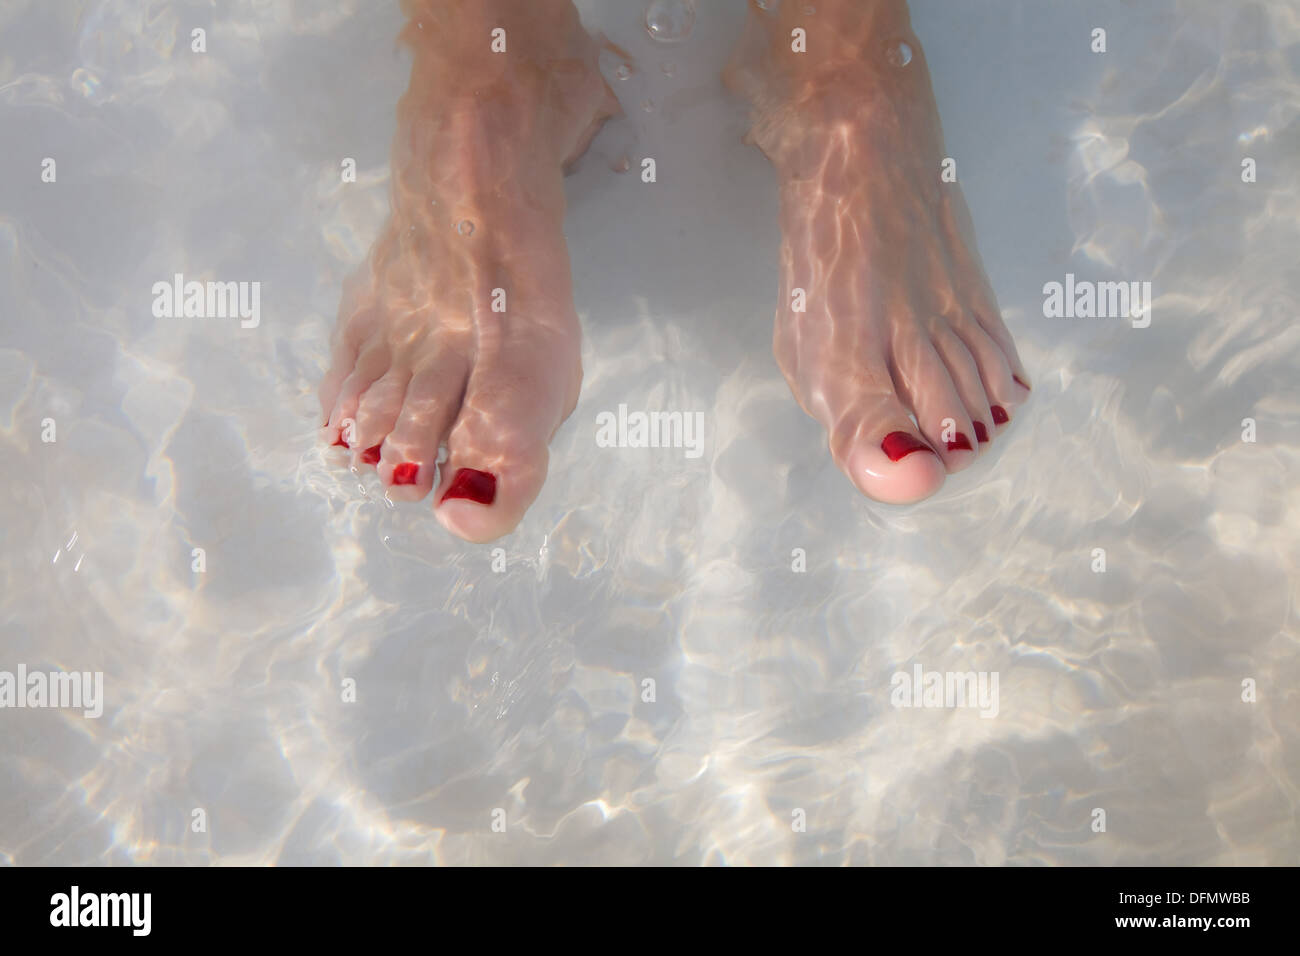 Toes painted red in a pool of water. Stock Photo